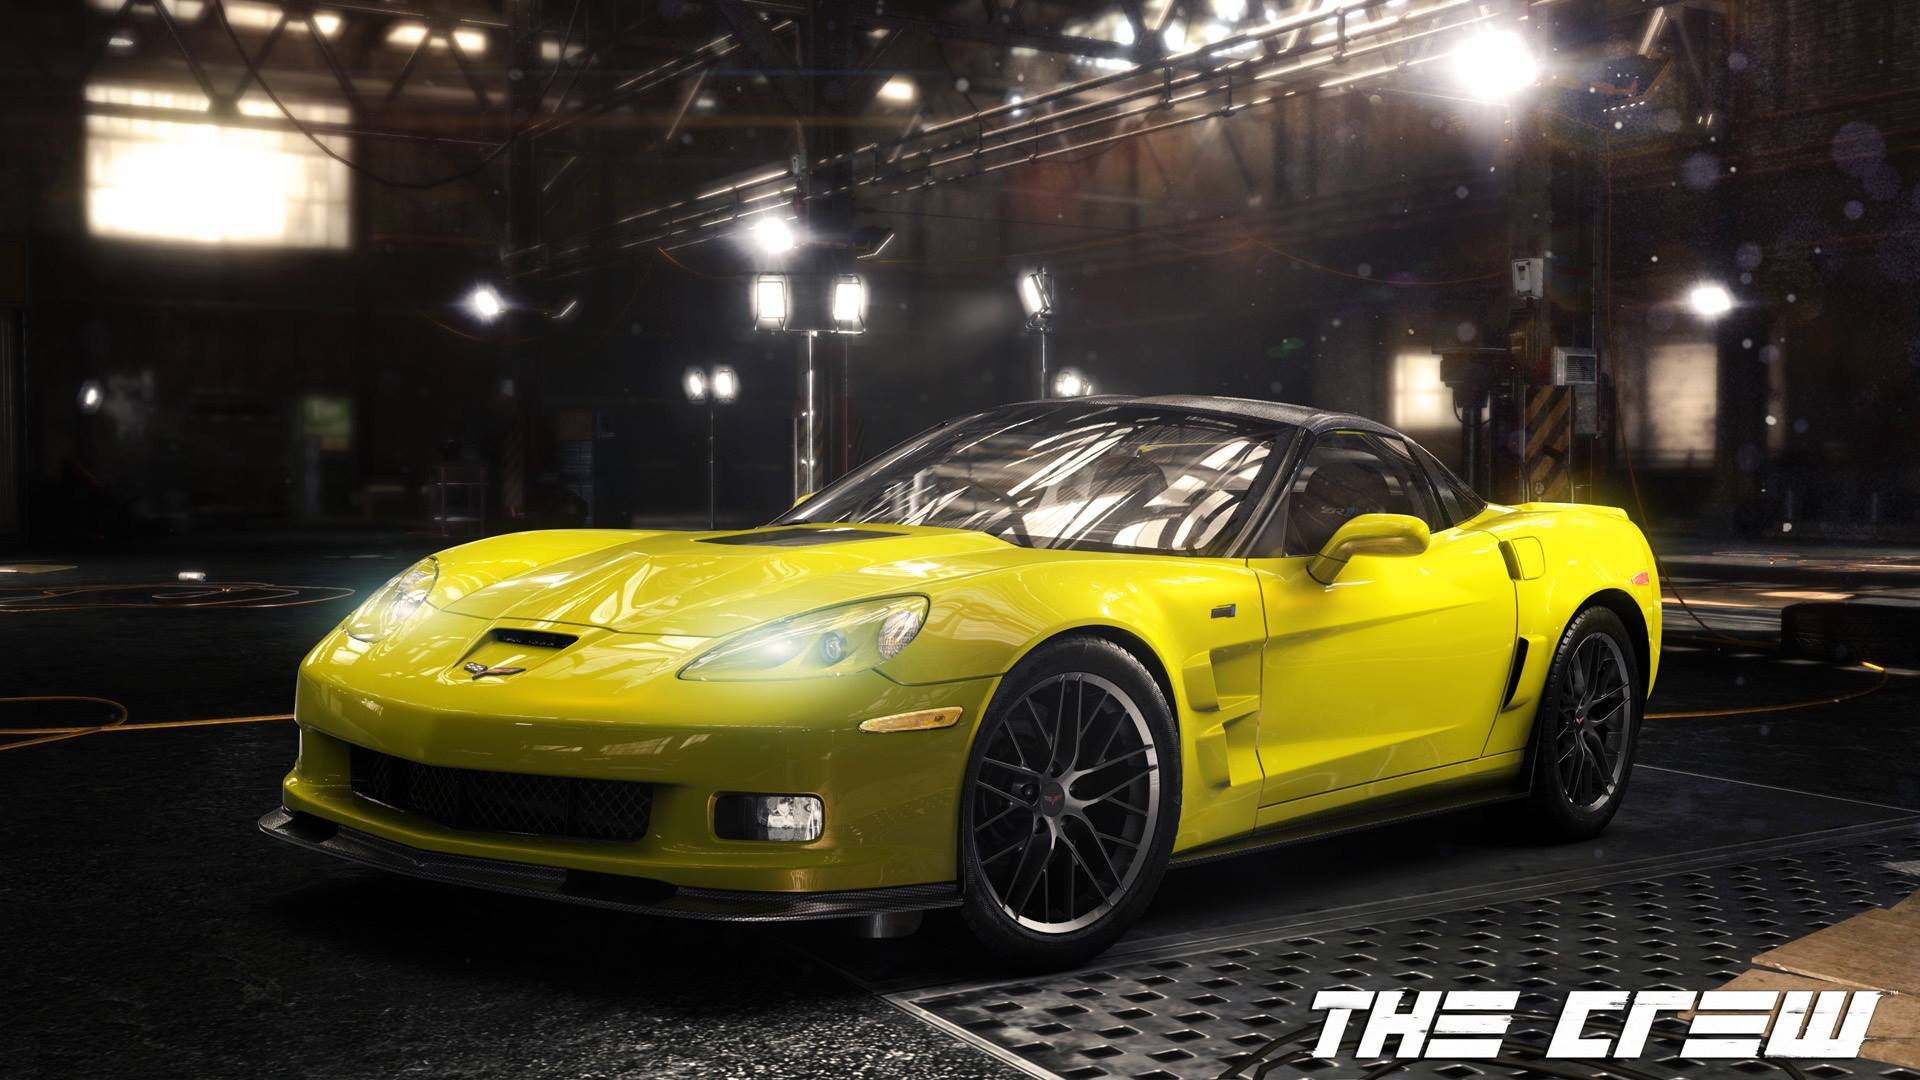 the crew, Racing, Race, Muscle, Tuning, Supercar, Crew, Rpg,  13 Wallpaper